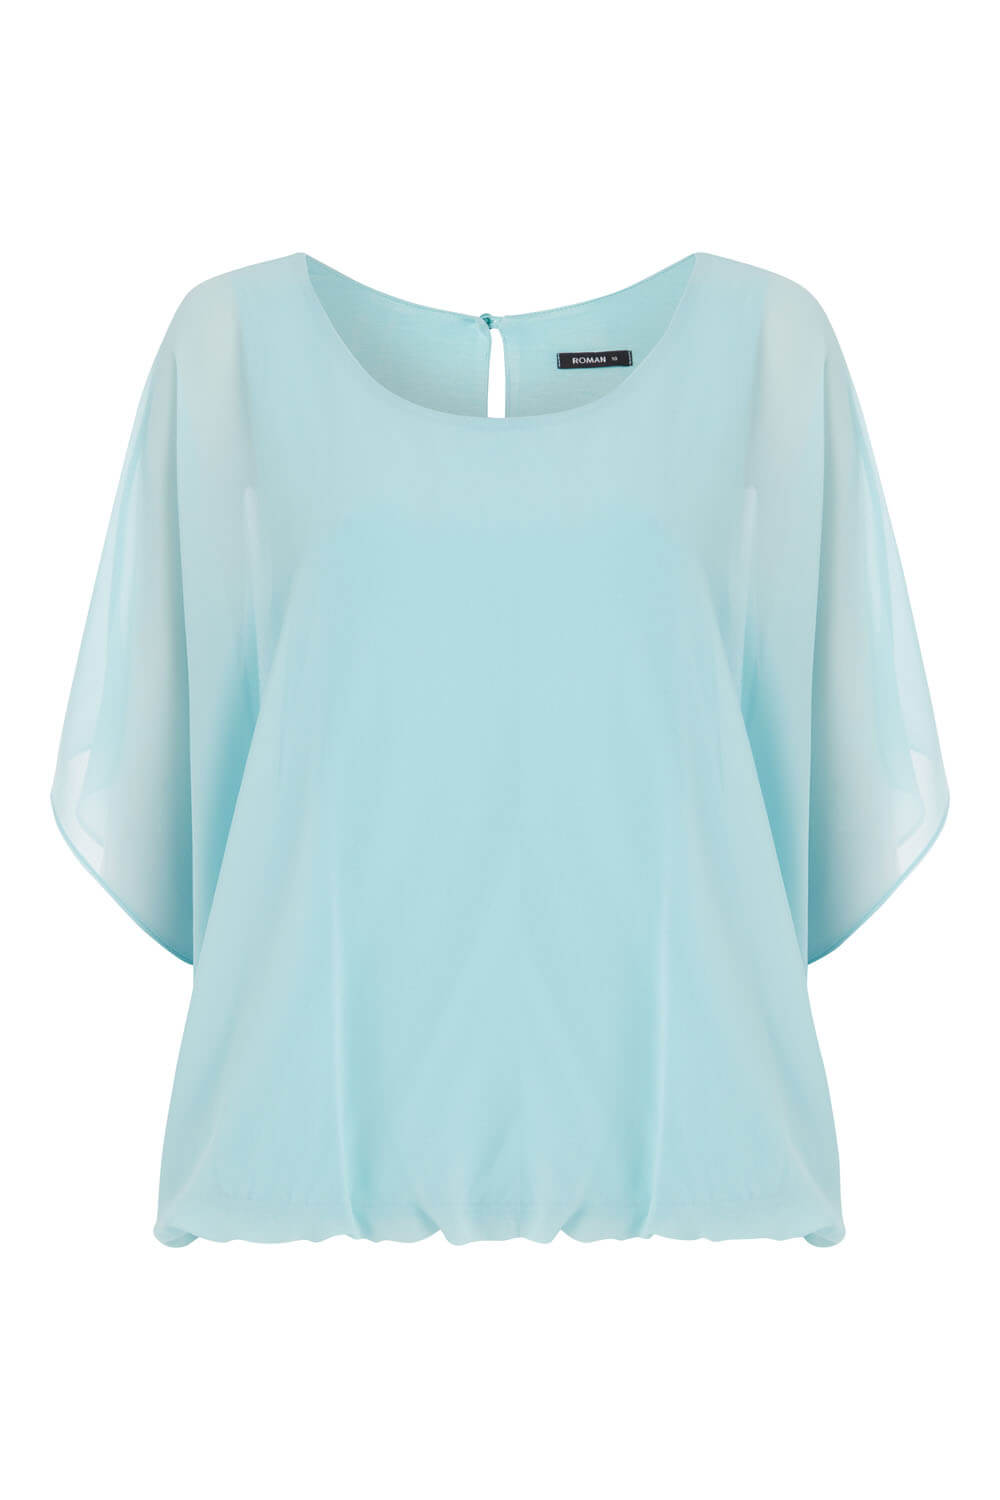 Turquoise Bubble Hem Top, Image 4 of 8